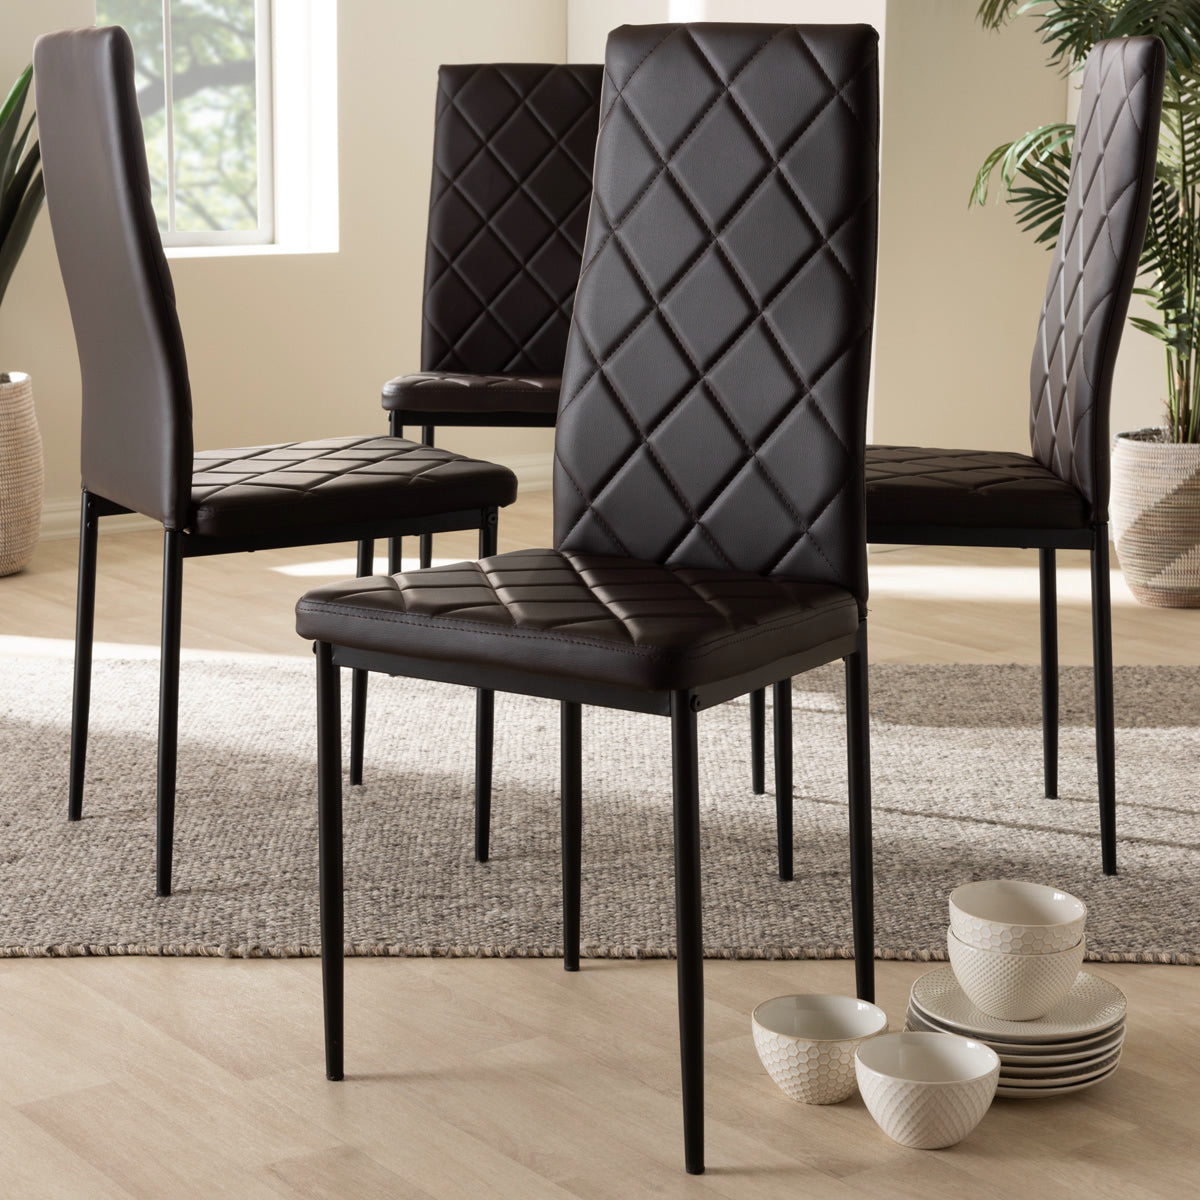 Baxton Studio Blaise Modern and Contemporary Brown Faux Leather Upholstered Dining Chair (Set of 4) Baxton Studio-dining chair-Minimal And Modern - 3